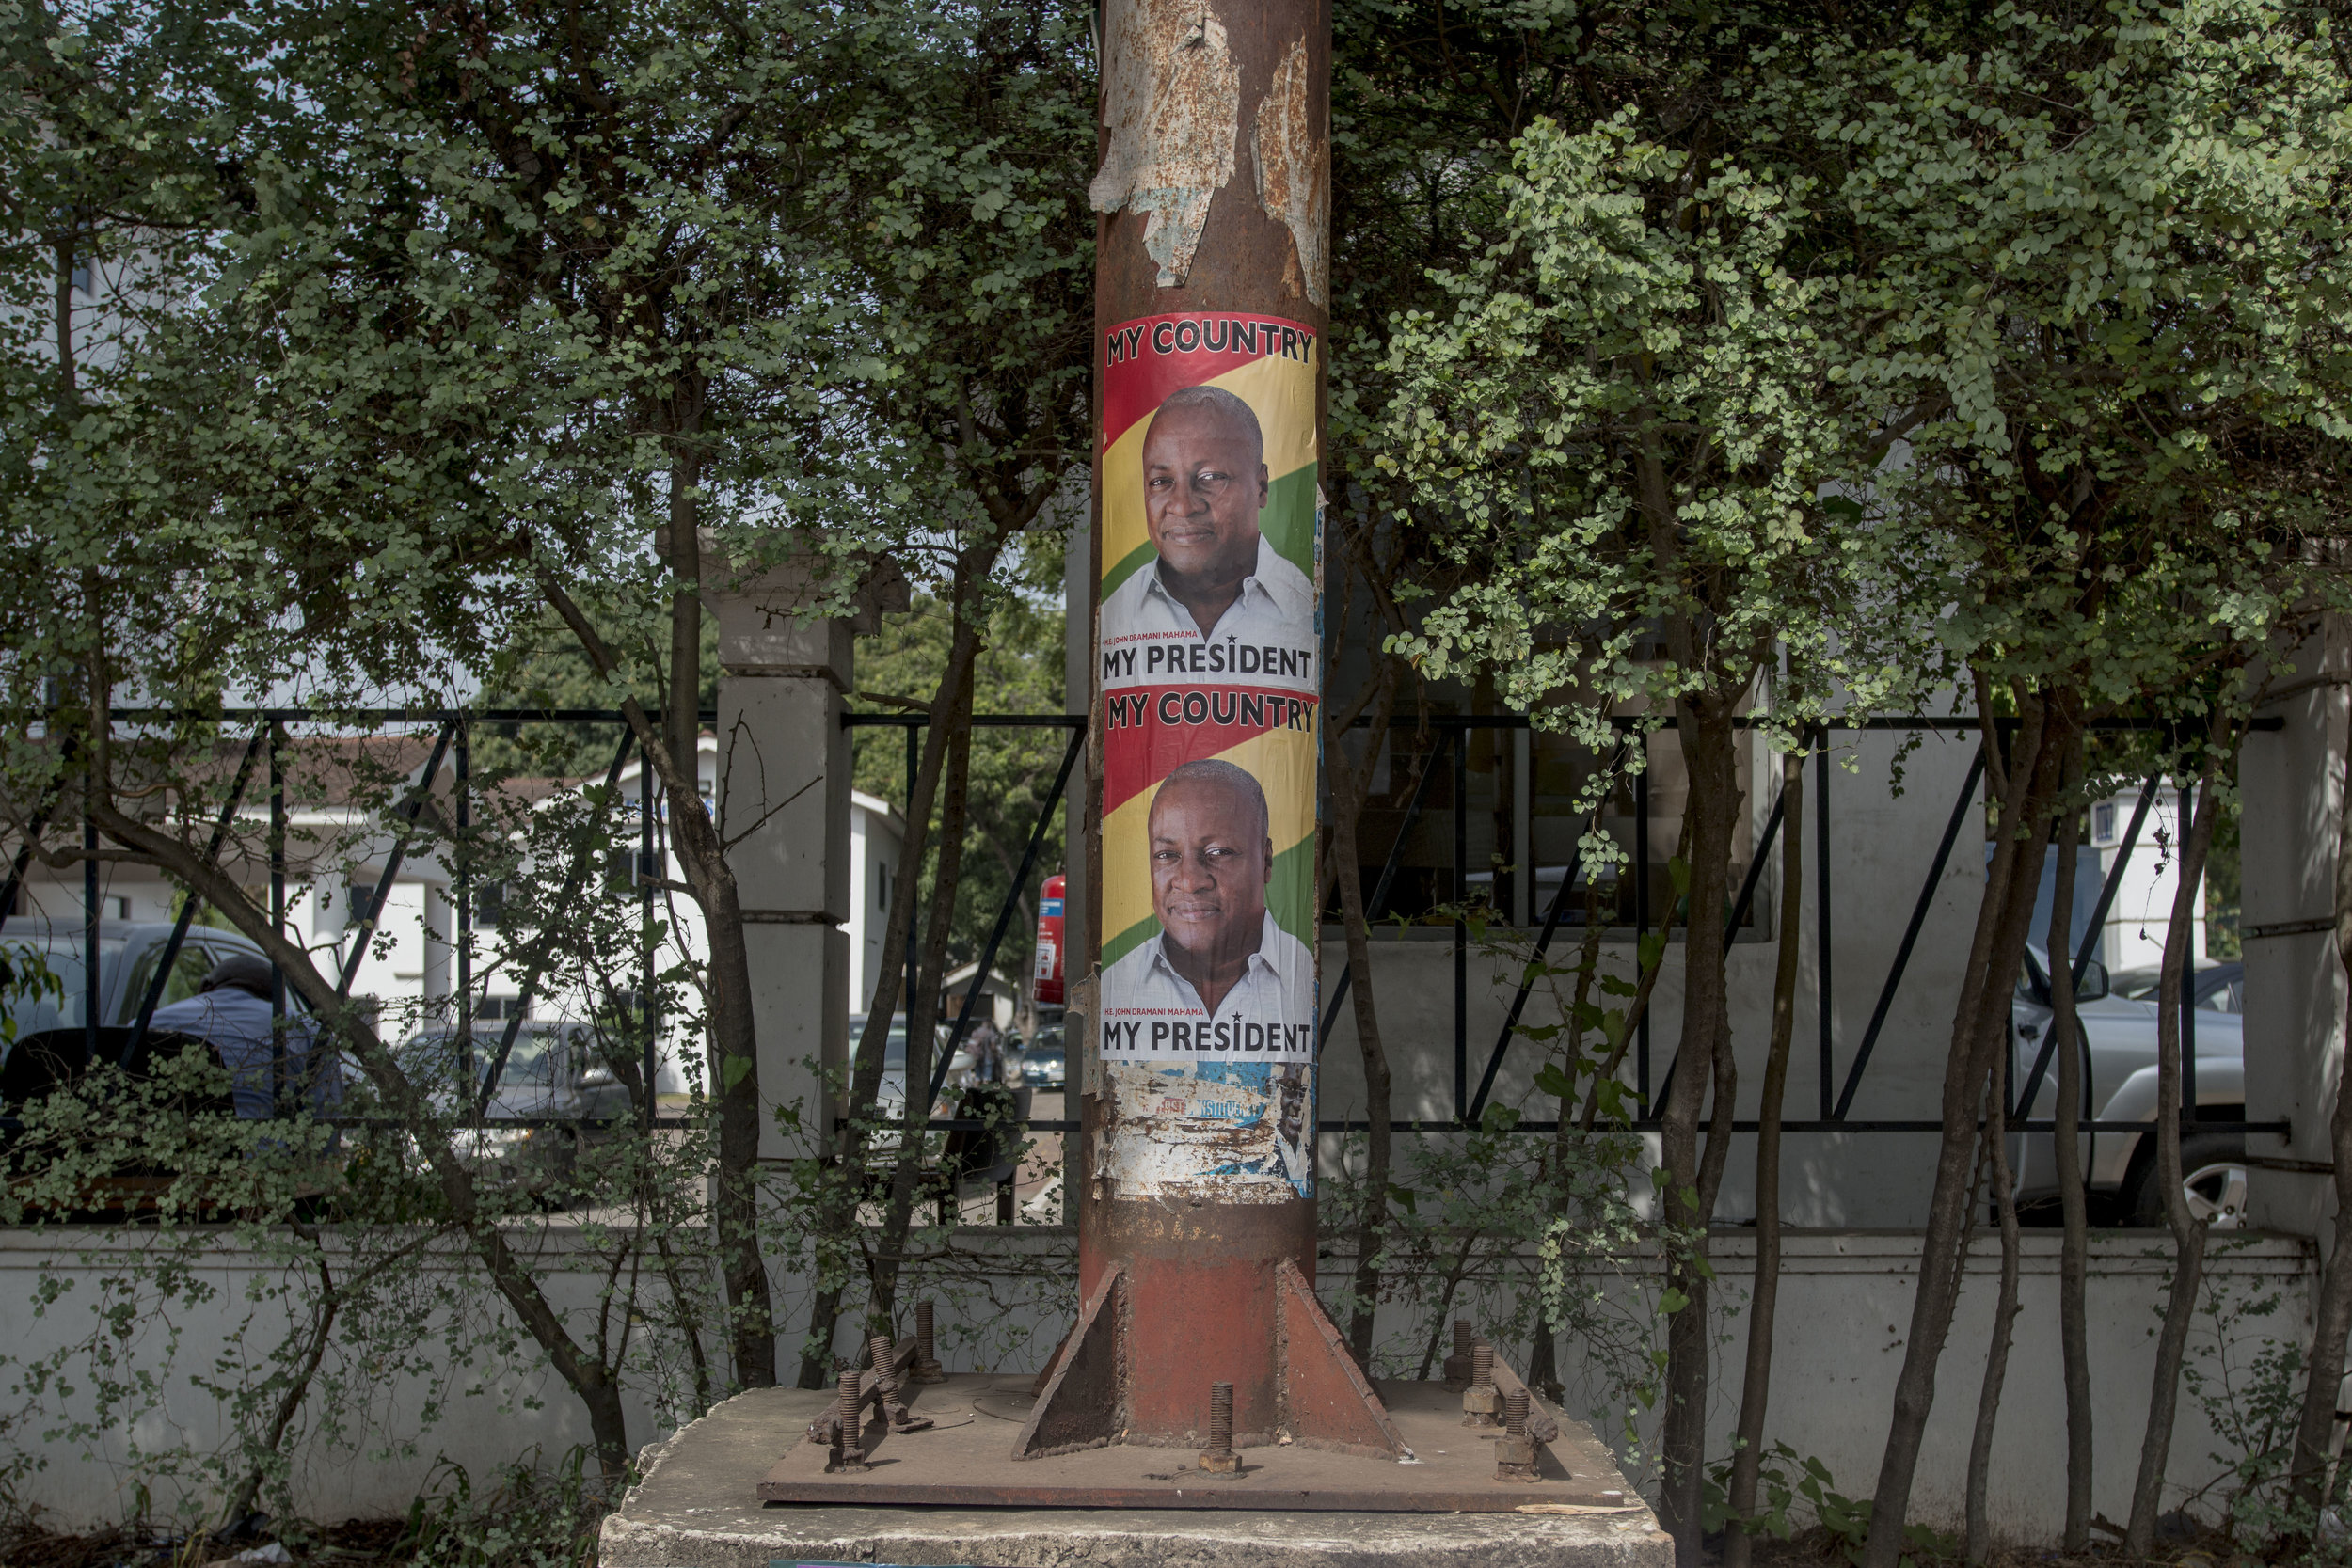  Billboards from a support group of the actual president of Ghana, Johan Dramani Mahama, and main candidate of the National Democratic Congress party for the incoming general election on 7th December can be seen in the city of Accra, Ghana 